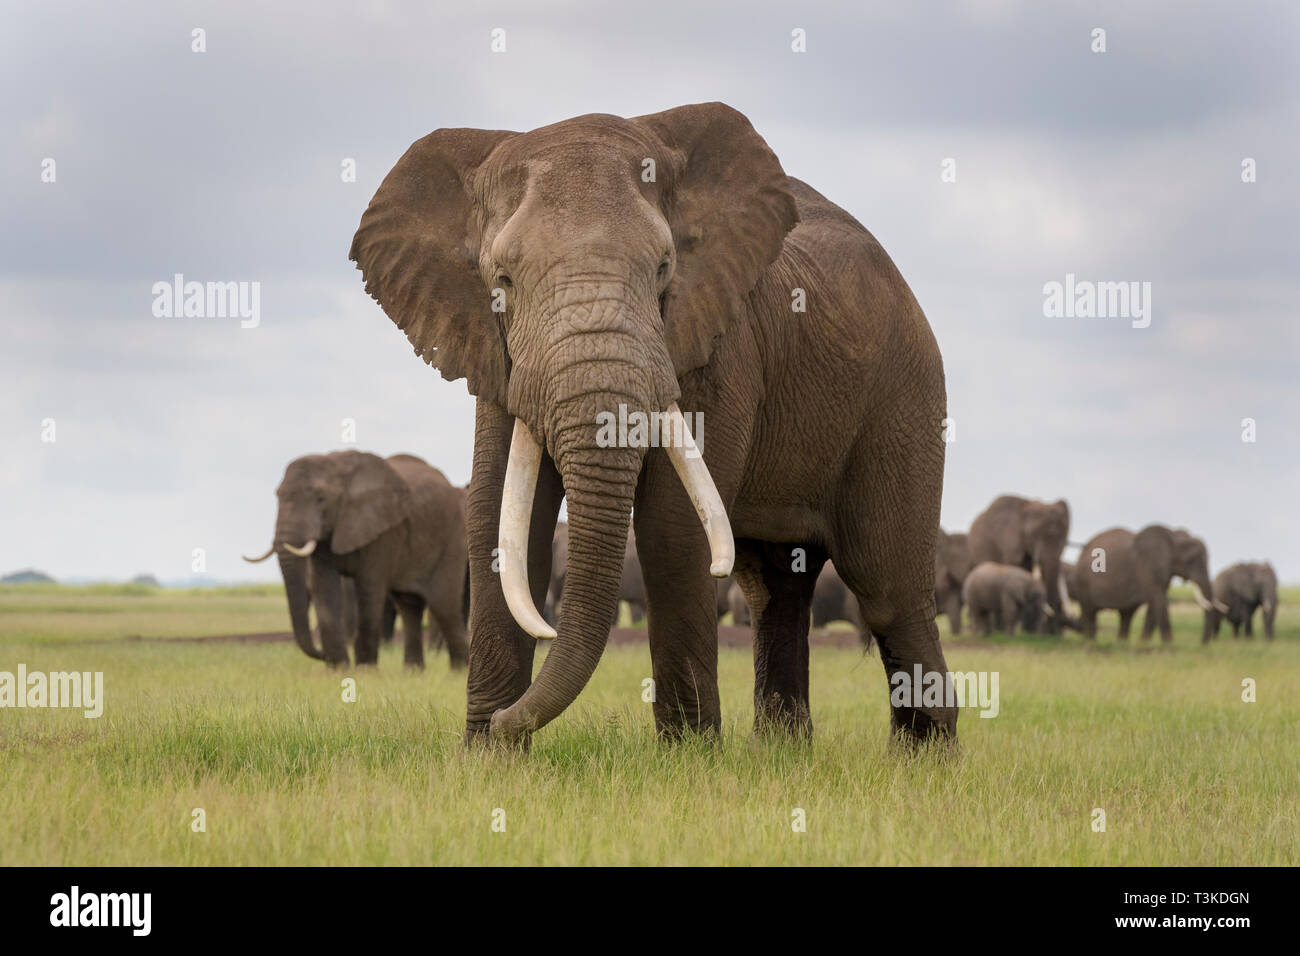 African elephant (Loxodonta africana) bull standing in front of herd, looking at camera, Amboseli national park, Kenya. Stock Photo